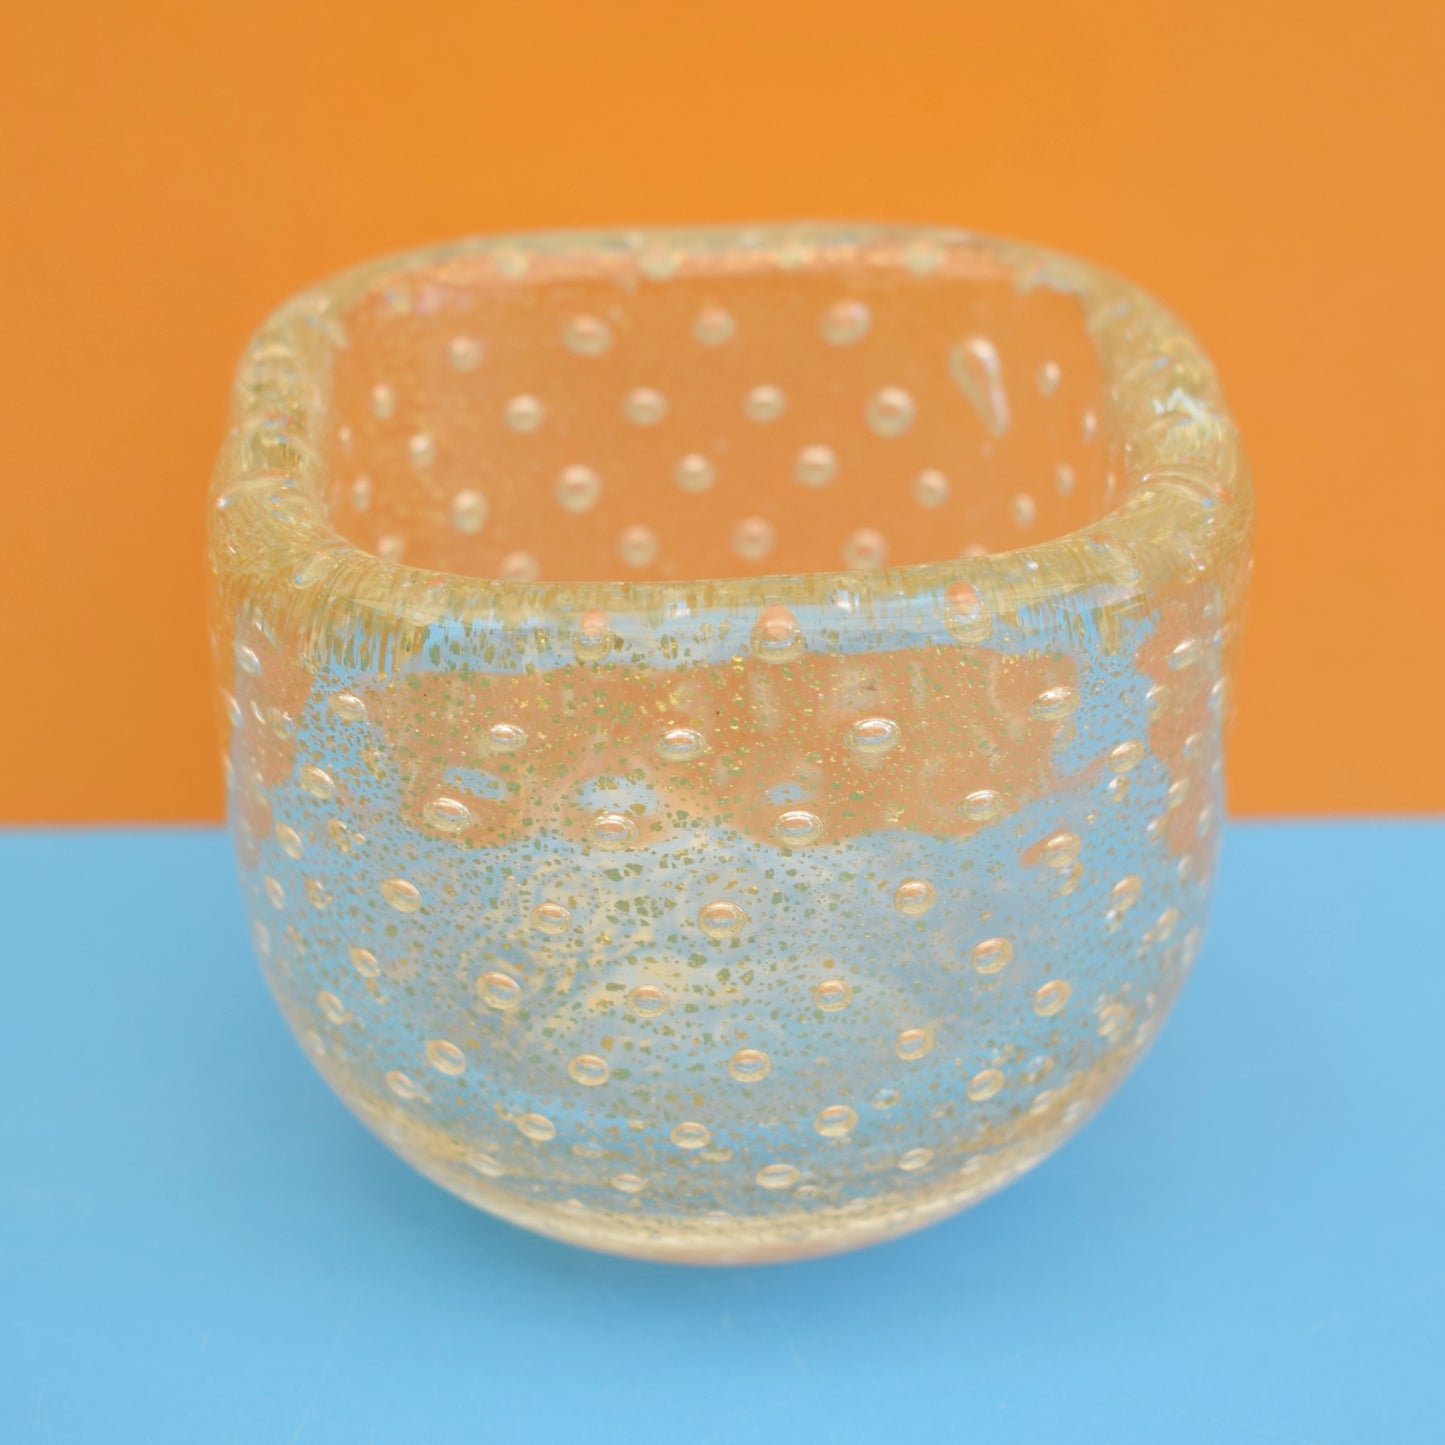 Vintage 1950s Italian Tiny Bubble Bowl - Gold Inclusions